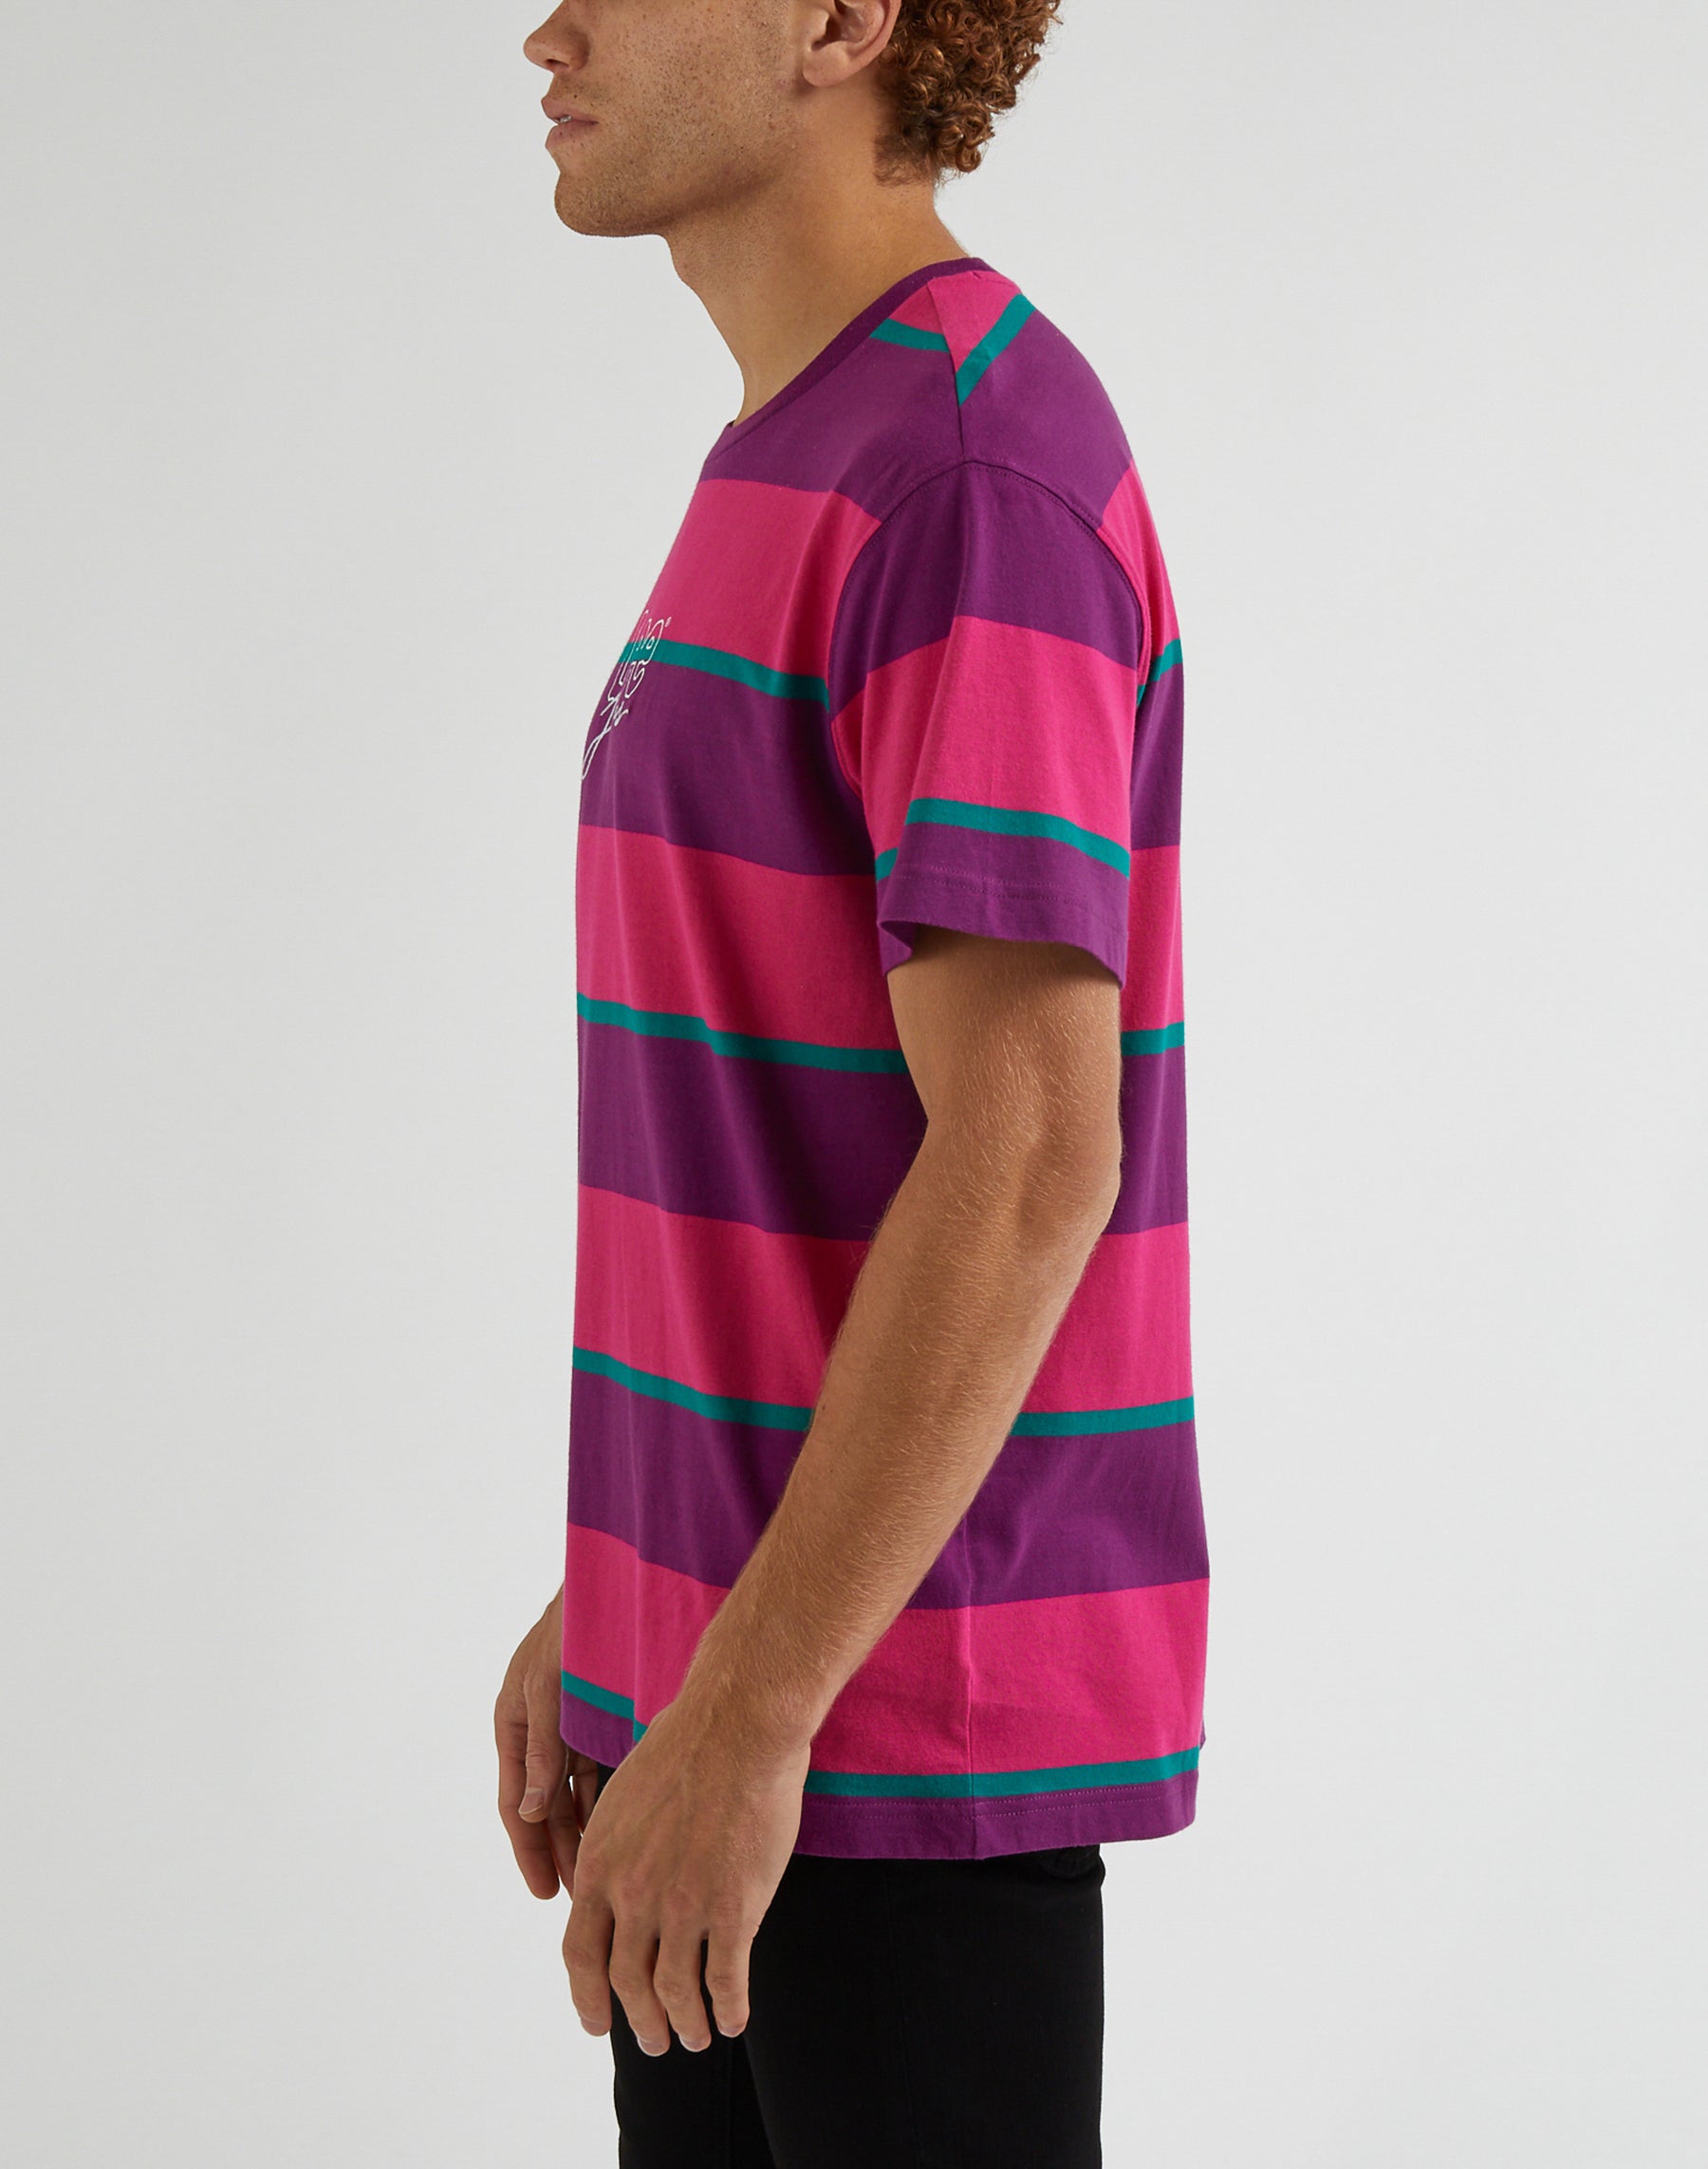 80S Relaxed Stripe Tee in Disco T-Shirts Lee   